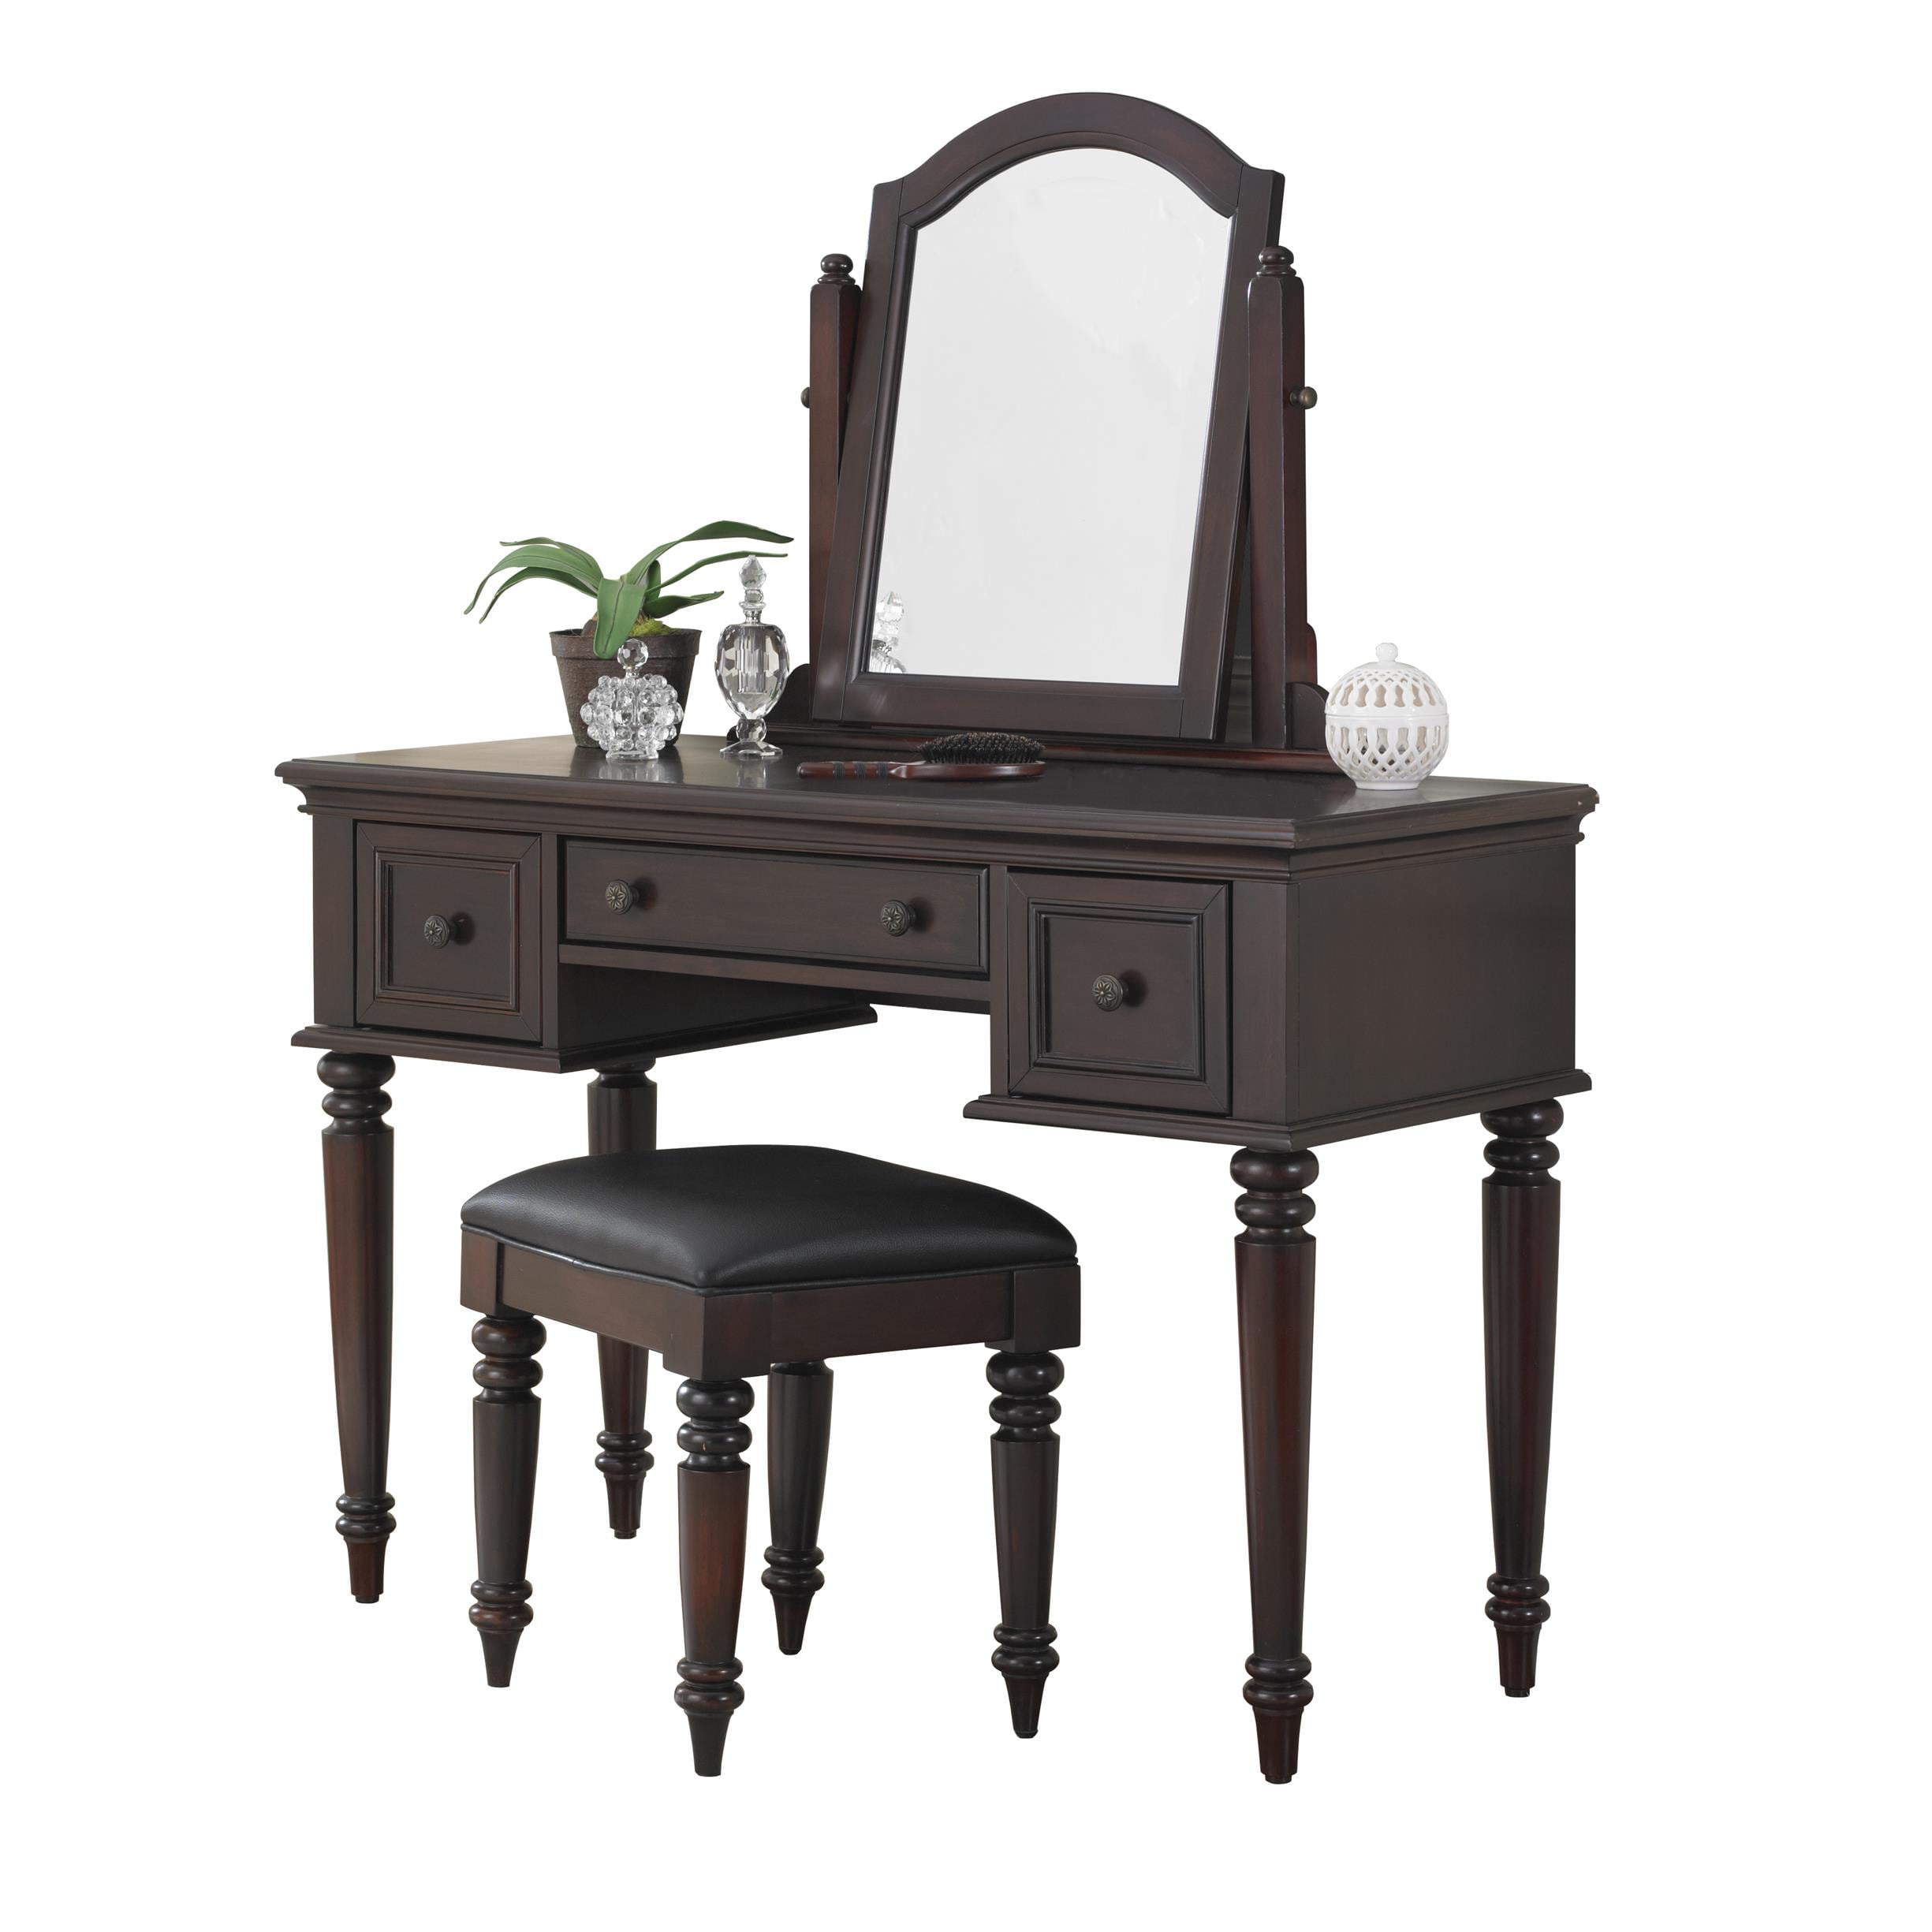 Image for home style vanity bench